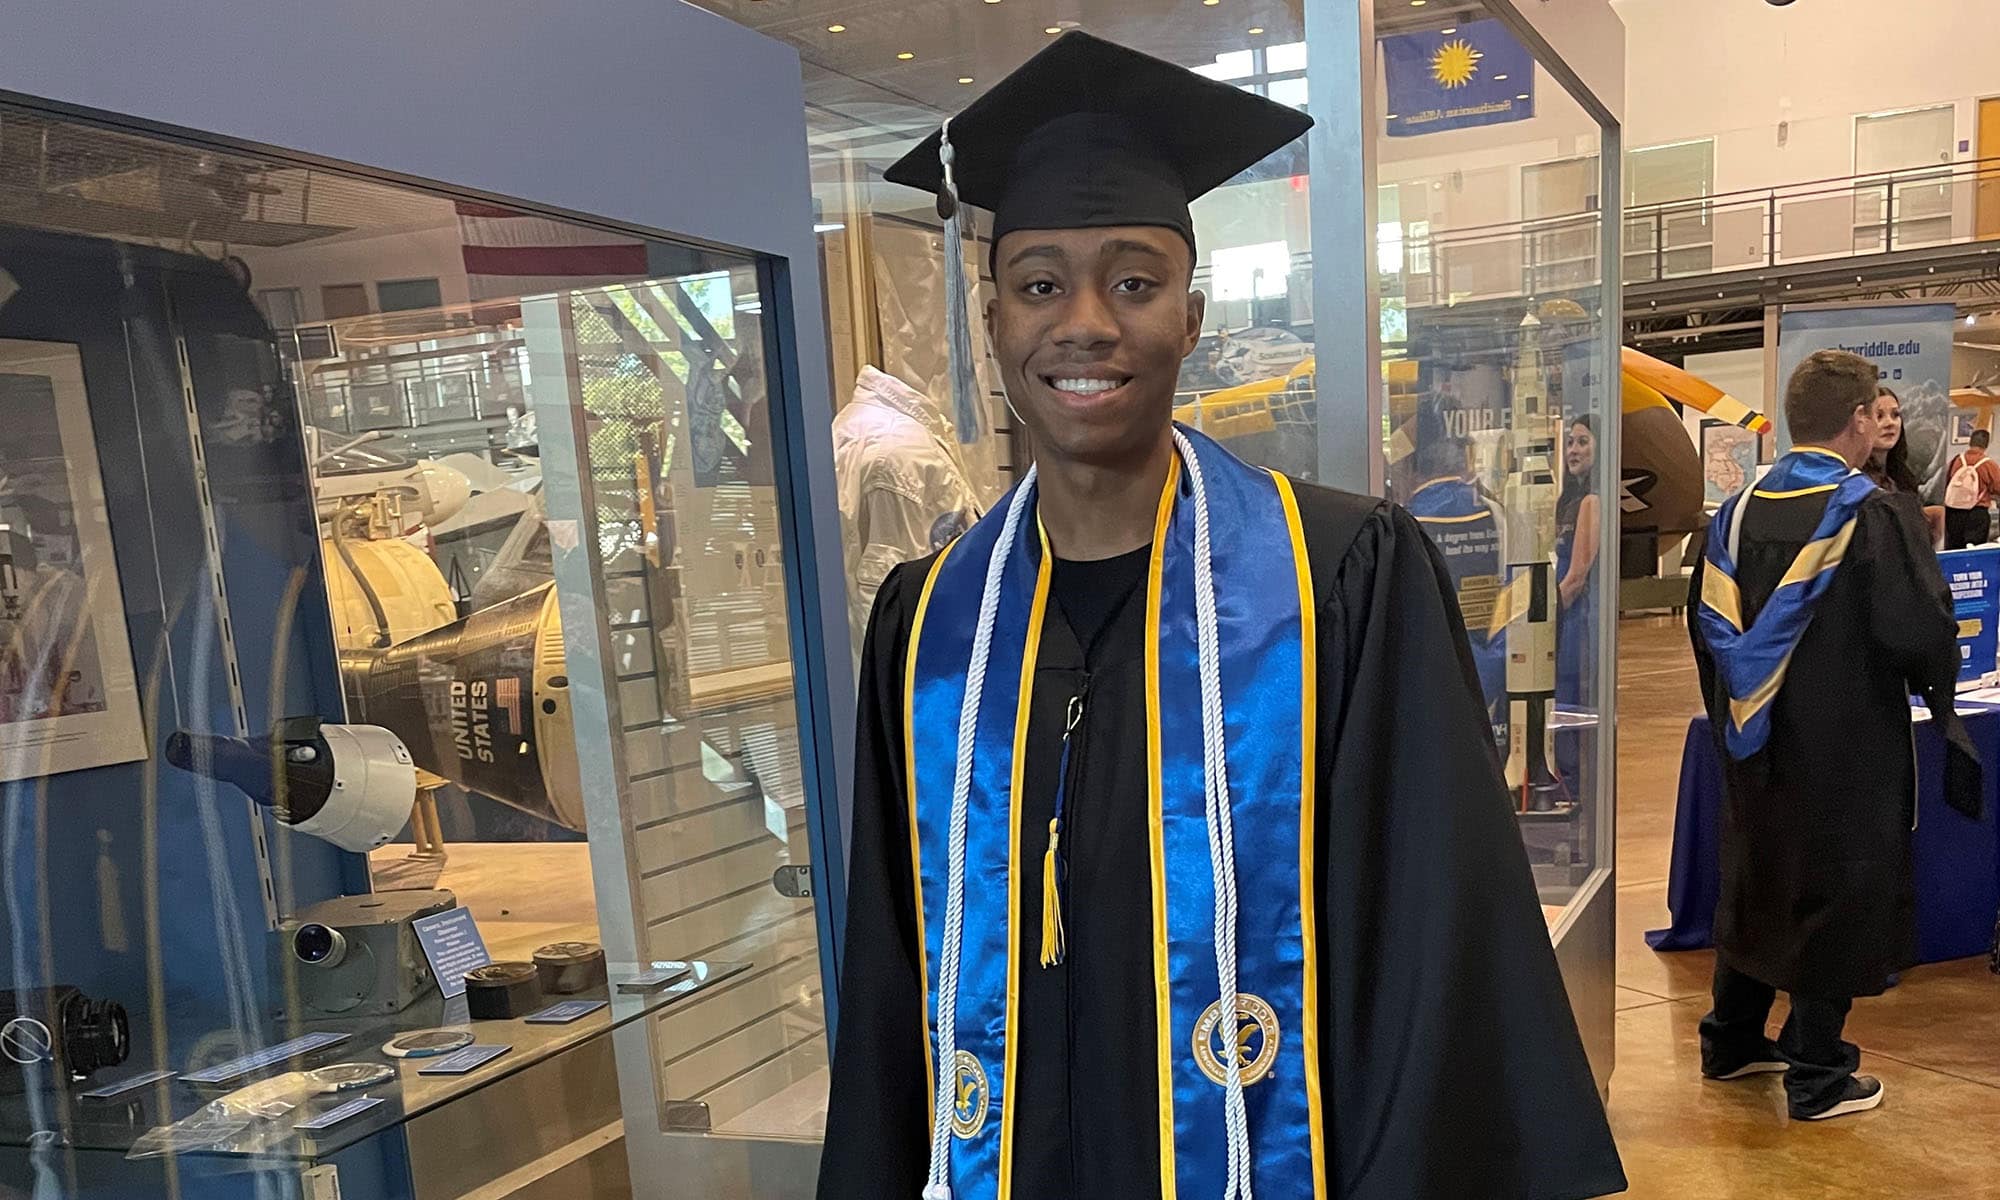 Kegan Martindale-Hernandez, shown here in cap and gown, celebrates earning his B.S. in Aeronautics during a Worldwide Campus graduation ceremony.